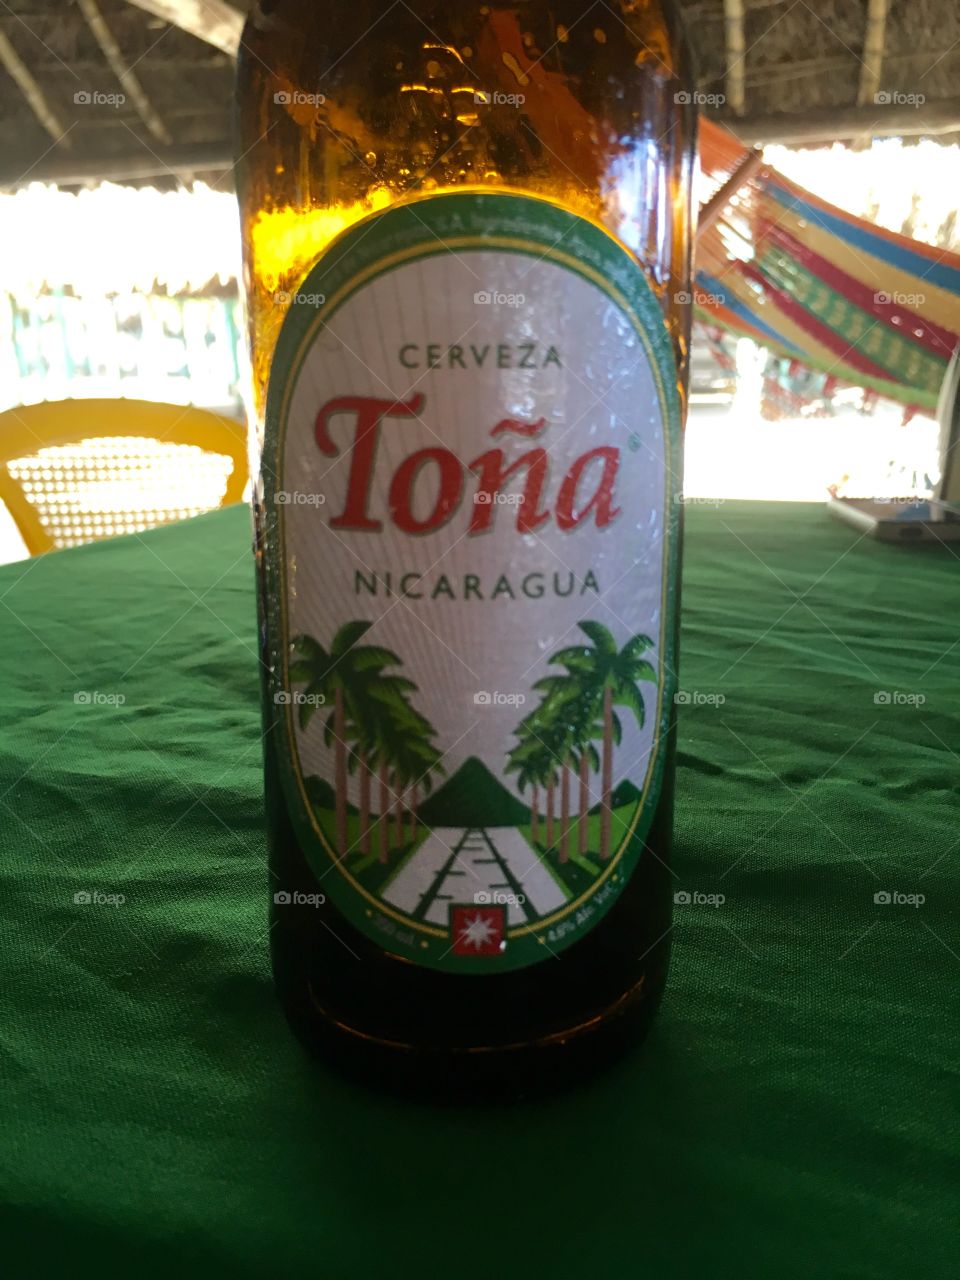 Nicaraguan beer. Day at the beach.